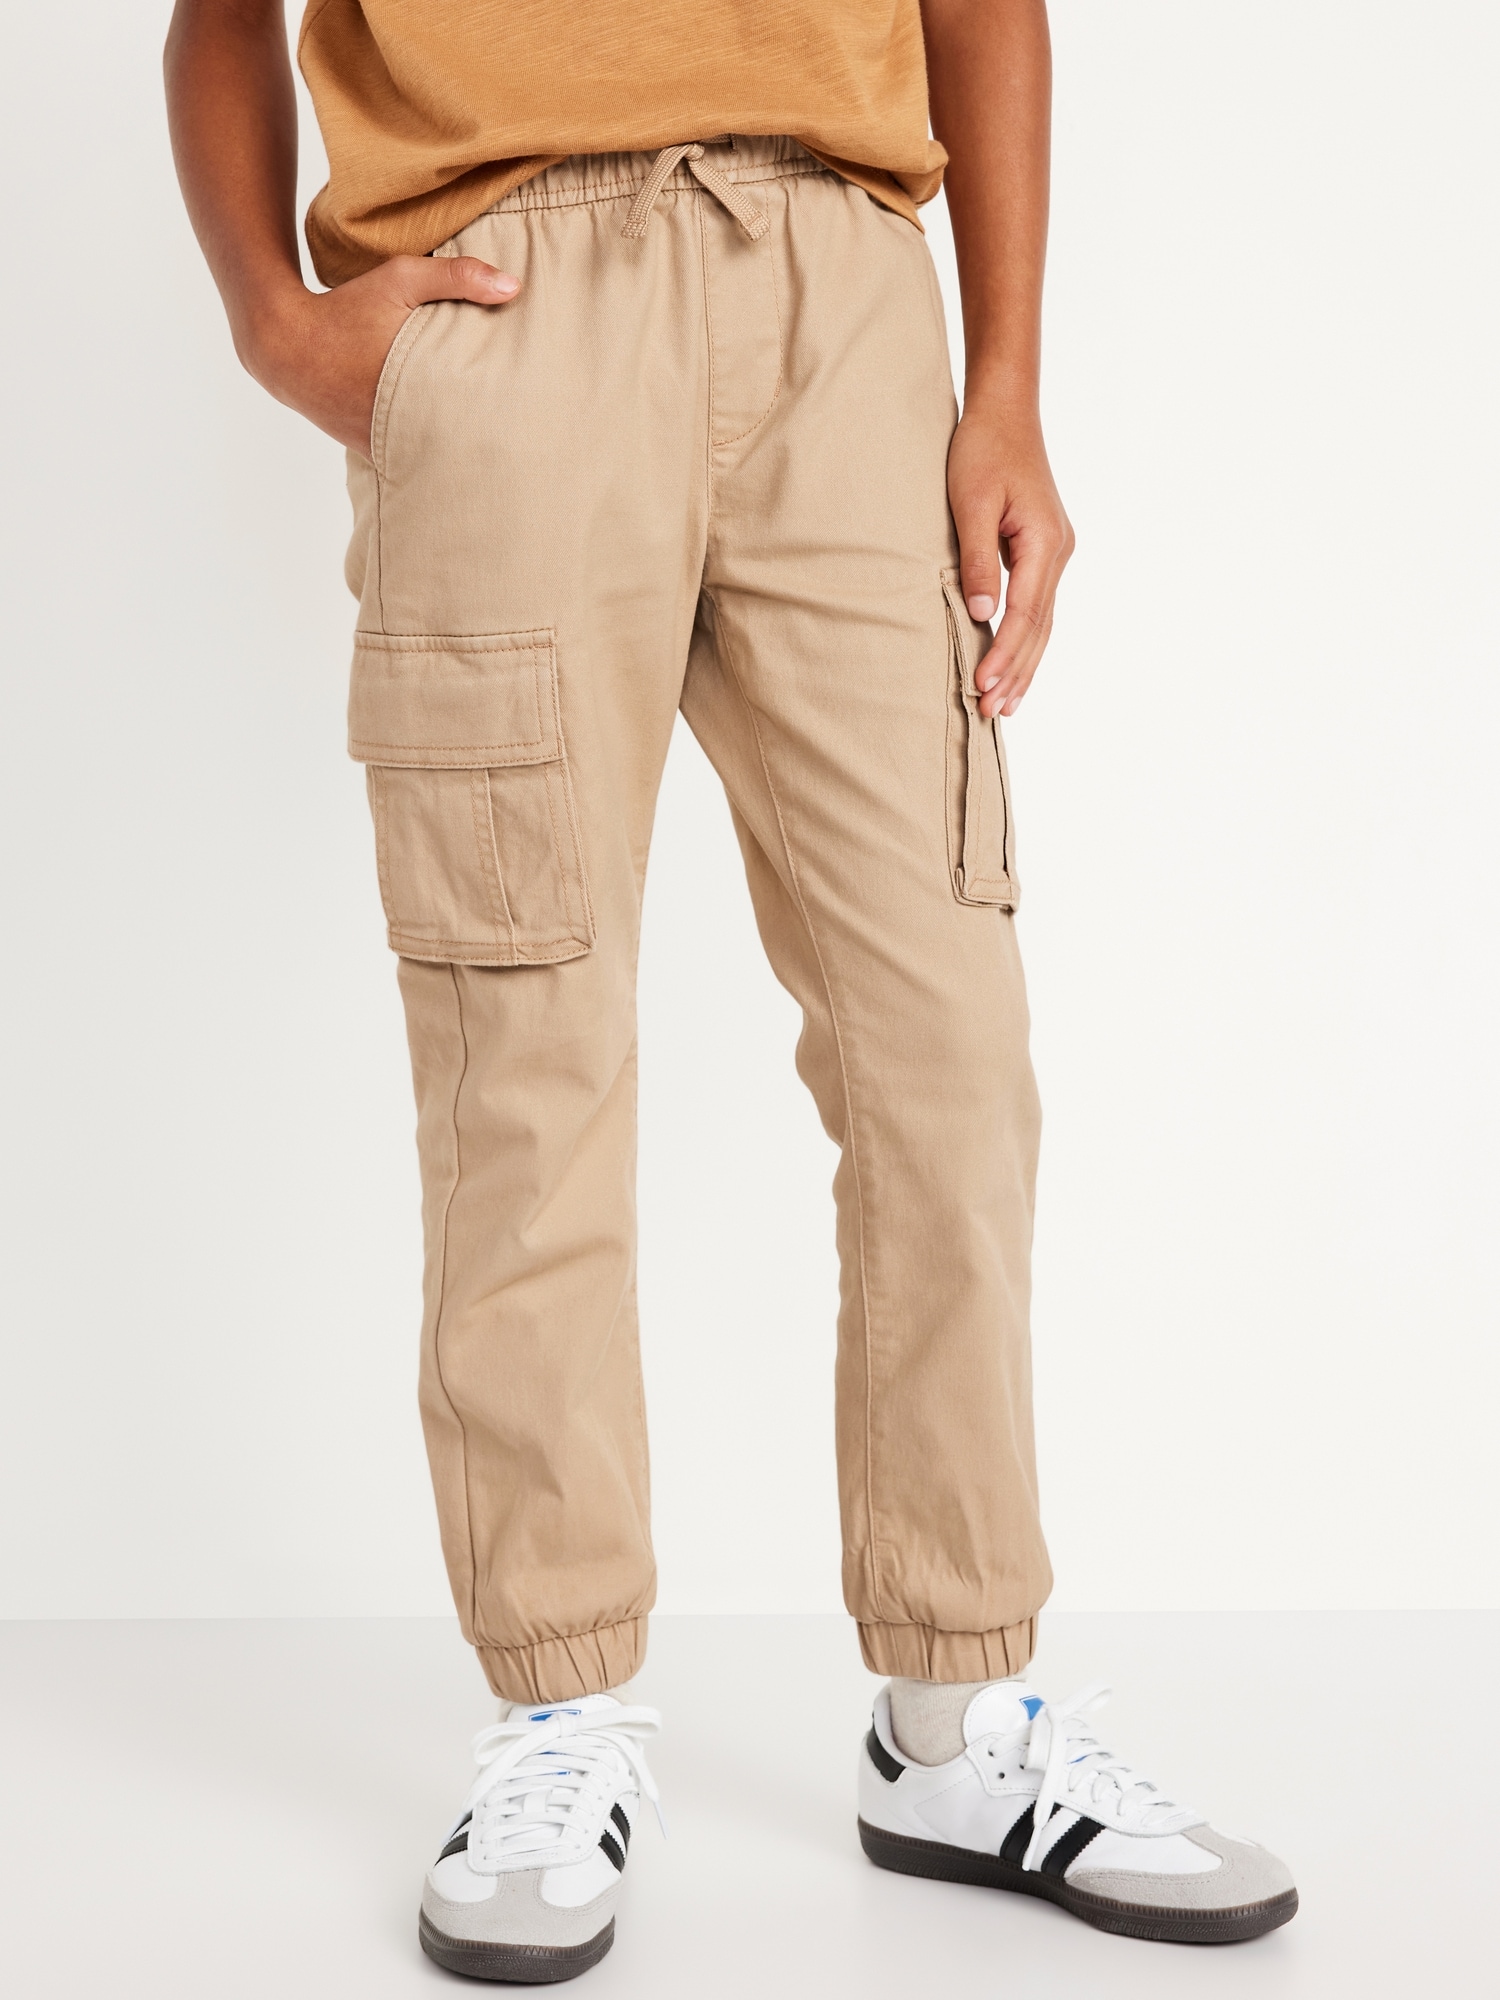 Stretch Twill Pants for Boys